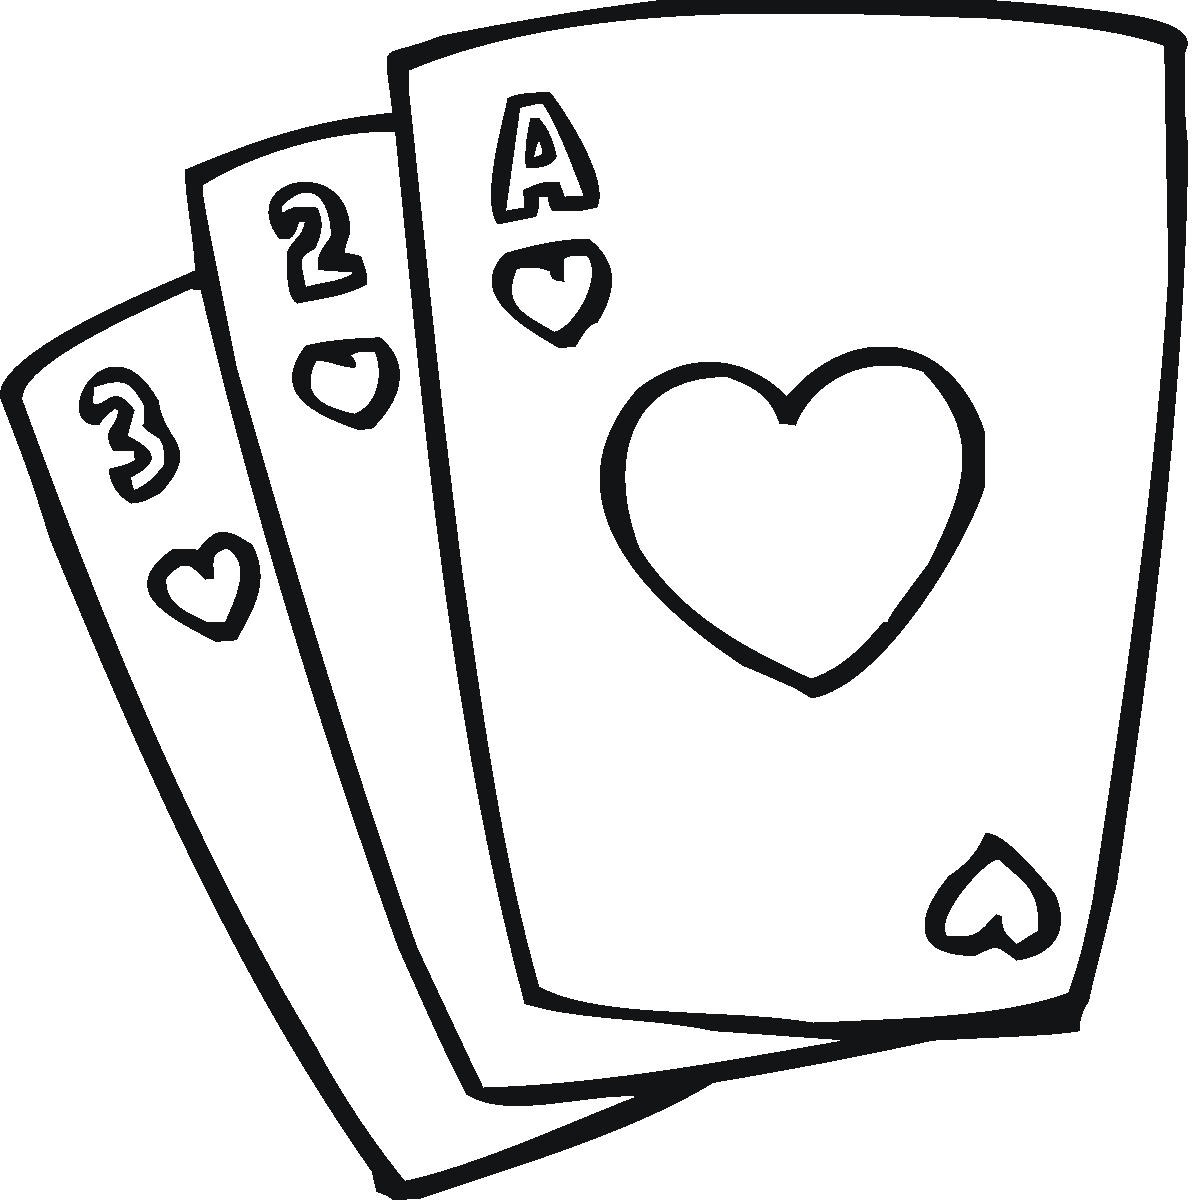 Free King of Hearts Playing C